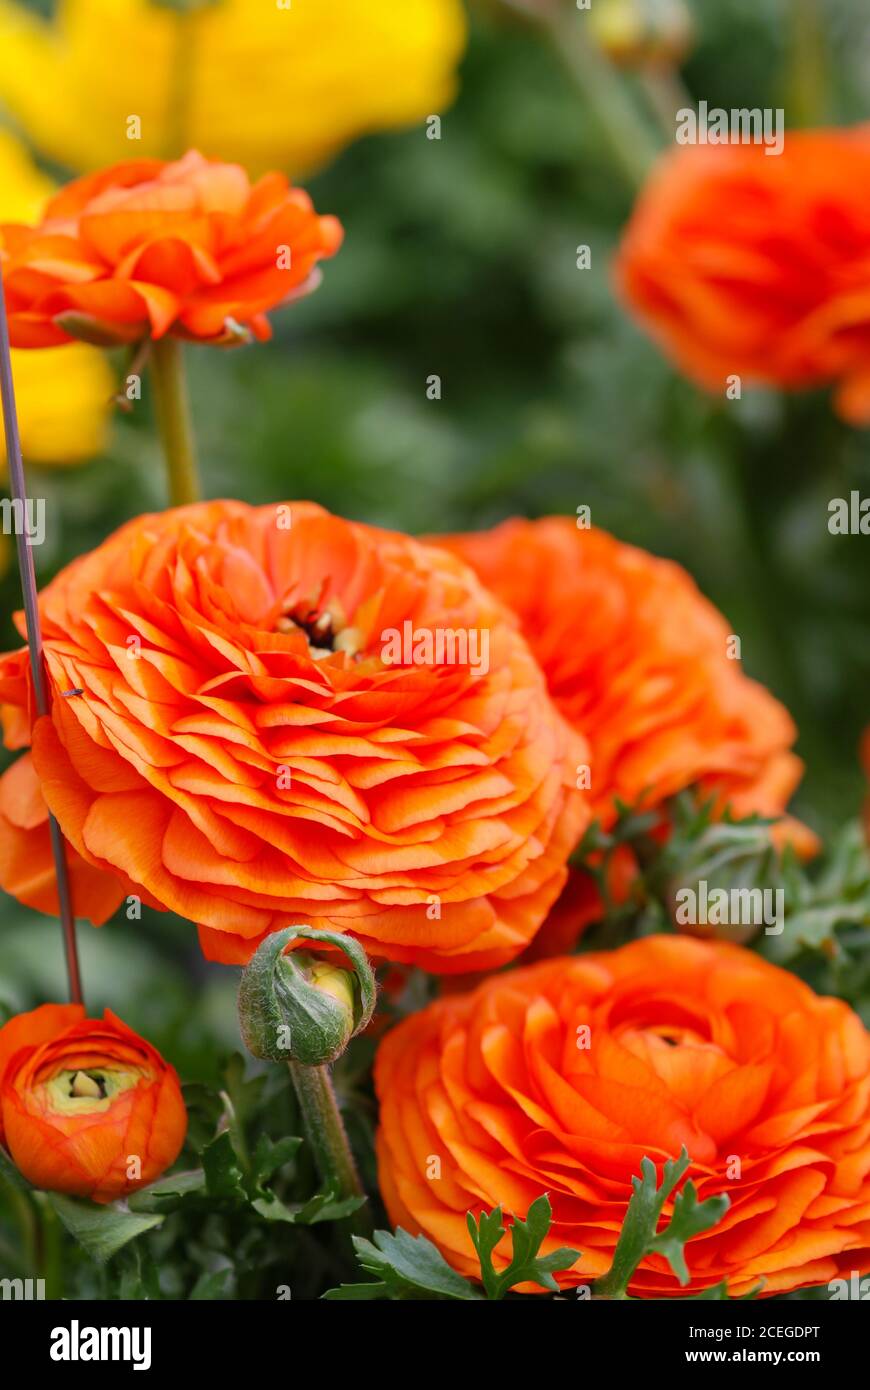 Ranunculus flora. A blossomed orange flower with detailed petals shot, potted plant Stock Photo